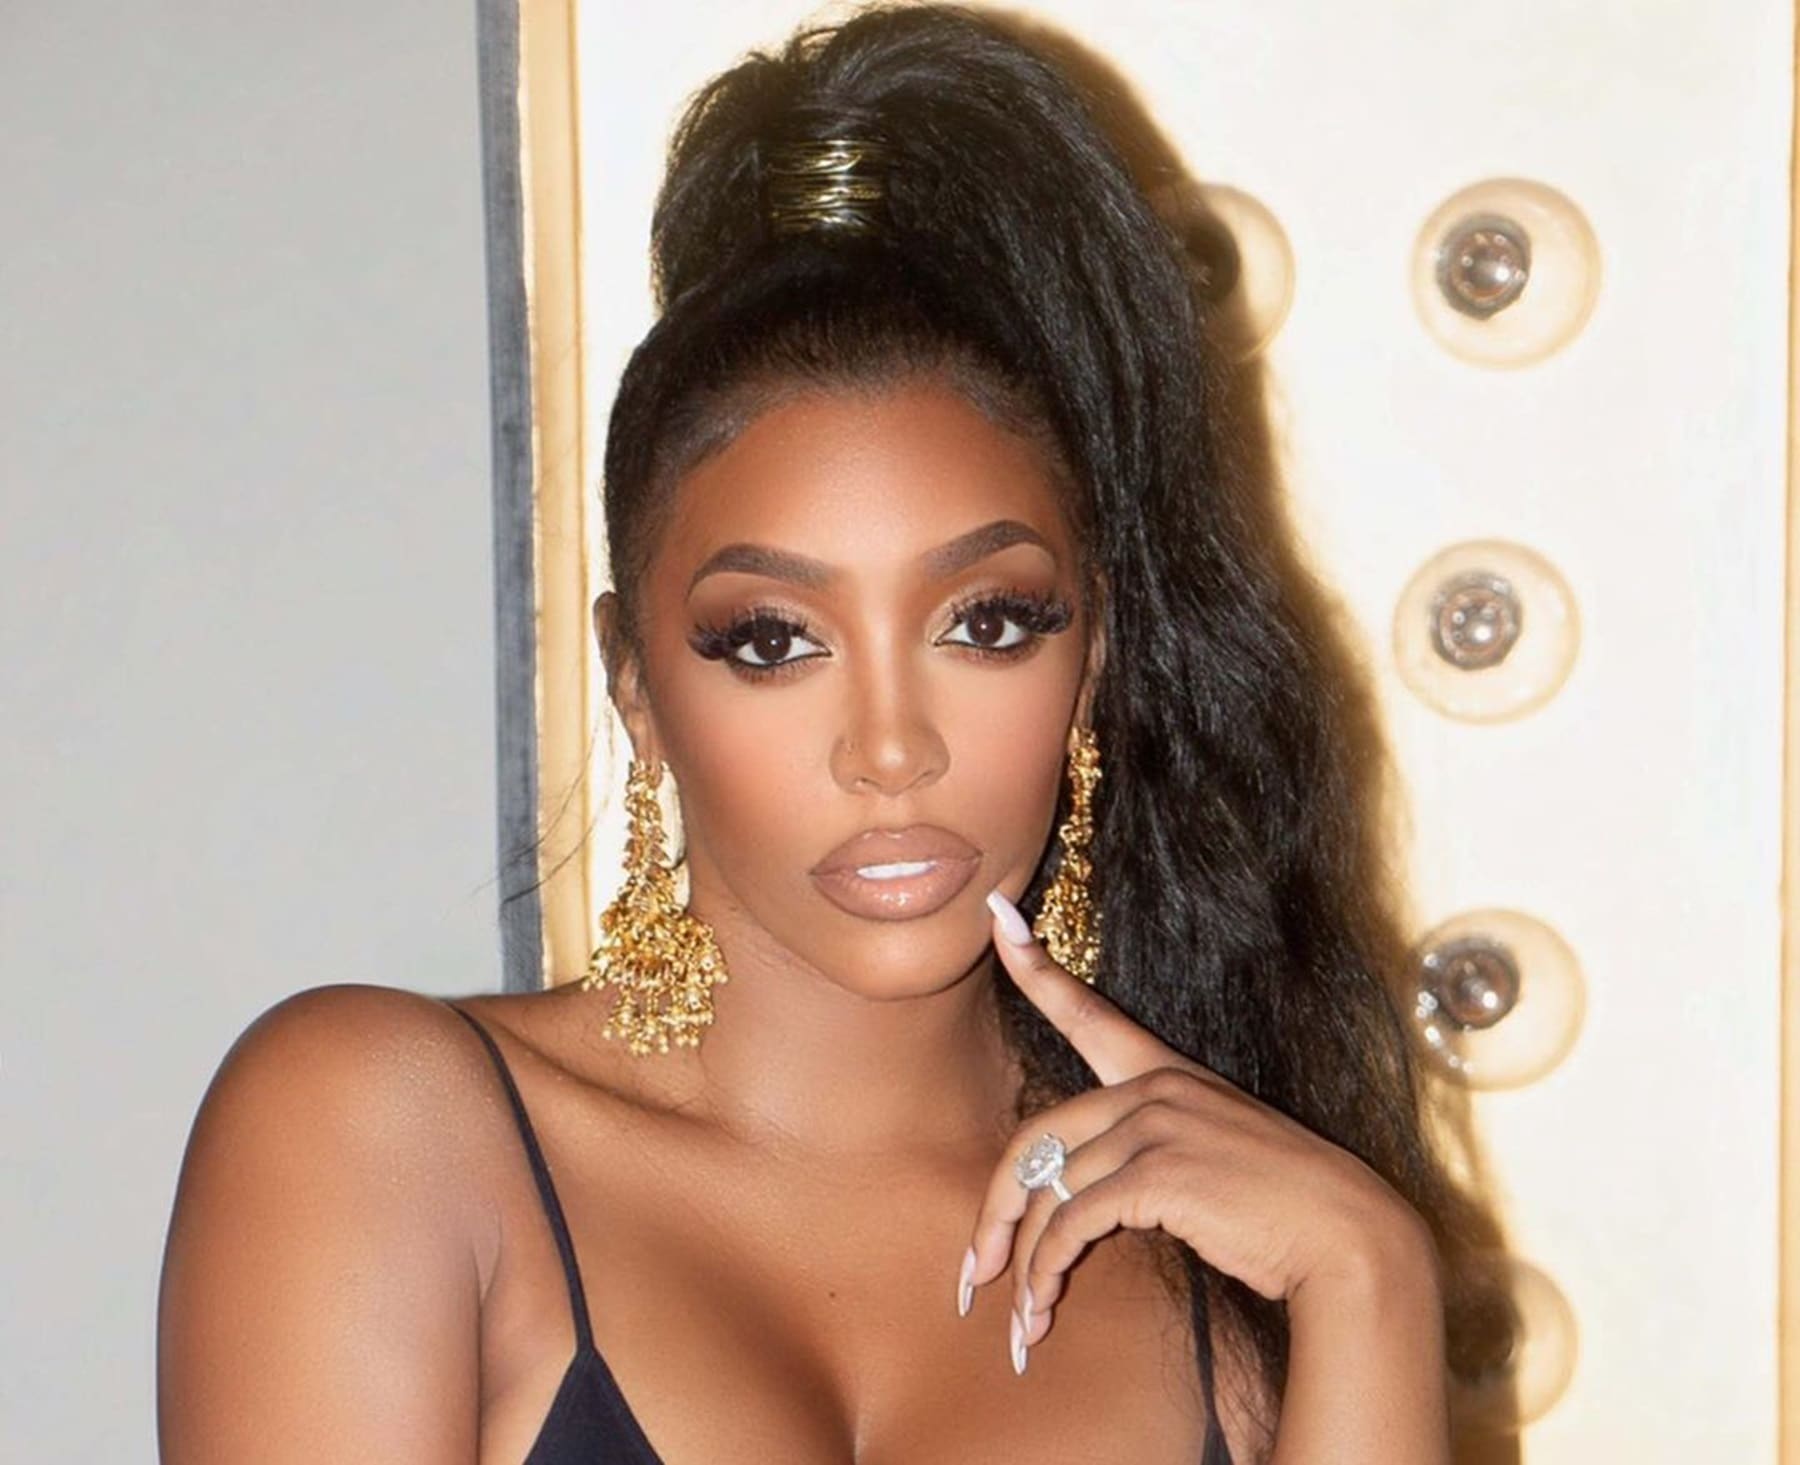 Porsha Williams' 'Postpartum Cravings' Have Fans Laughing - Check Out Her Recent Post